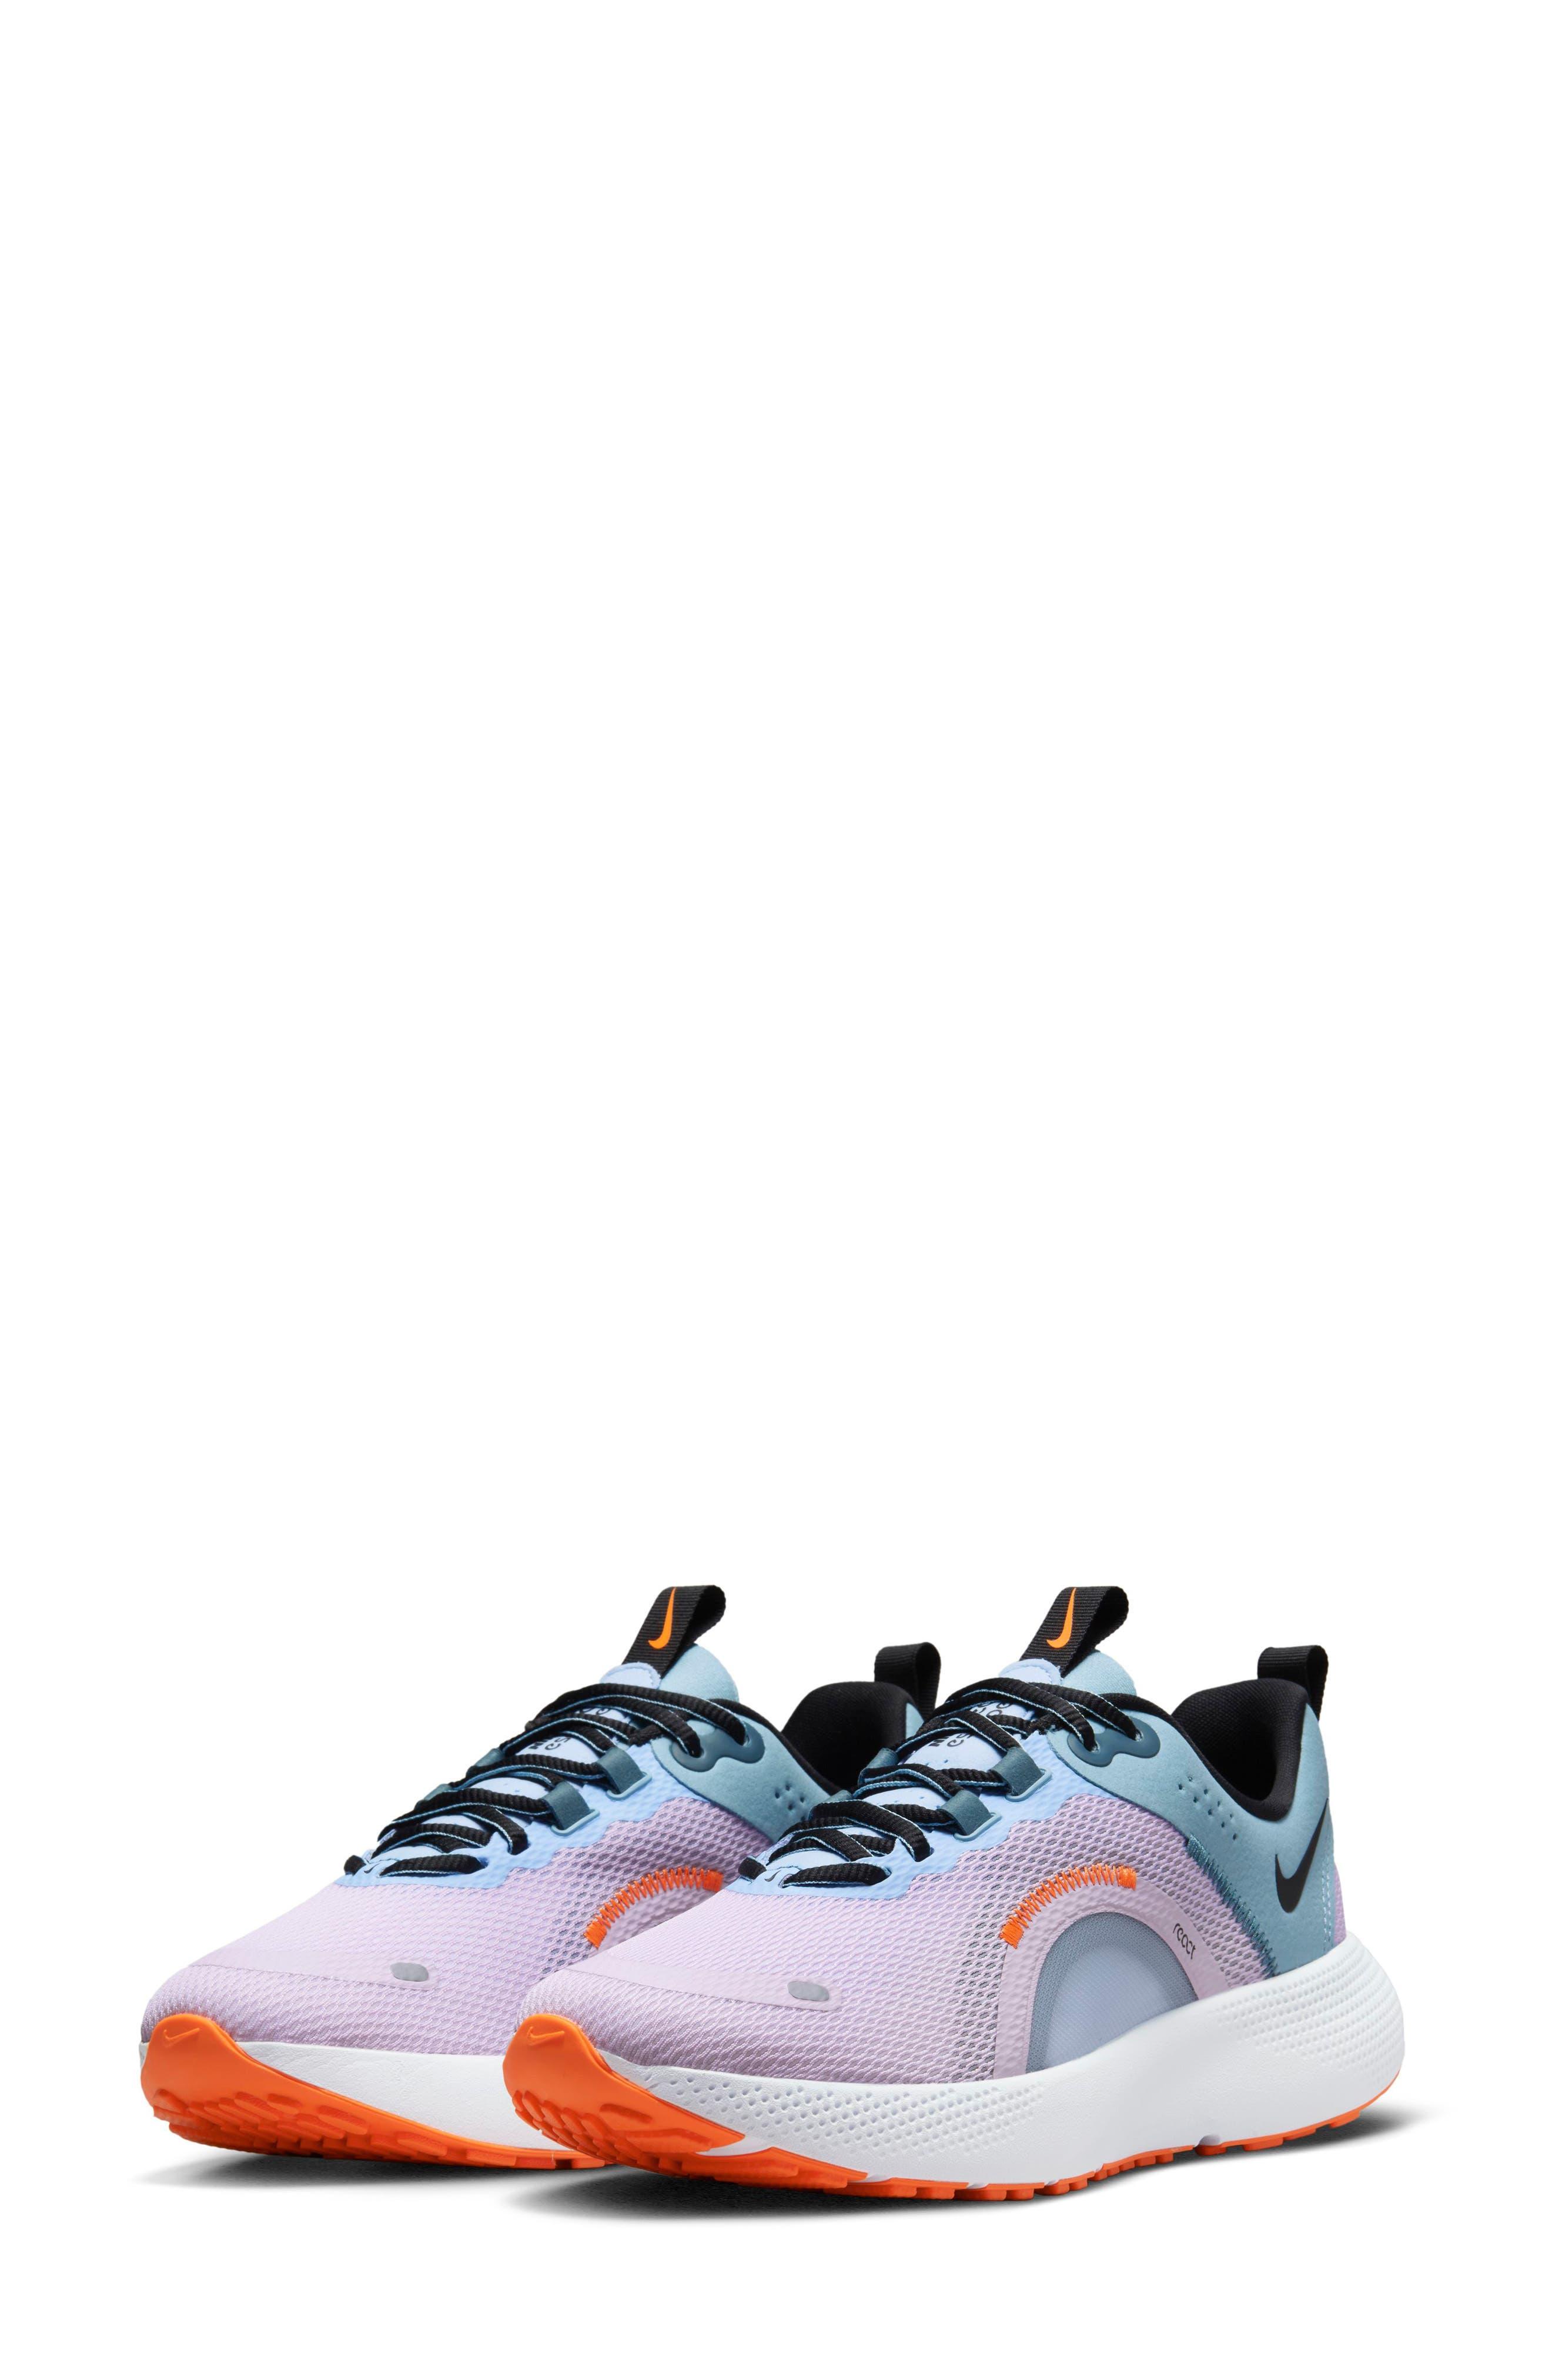 Nike React Escape Run 2 Running Shoe In Black/marine/blue At Nordstrom Rack  in White | Lyst